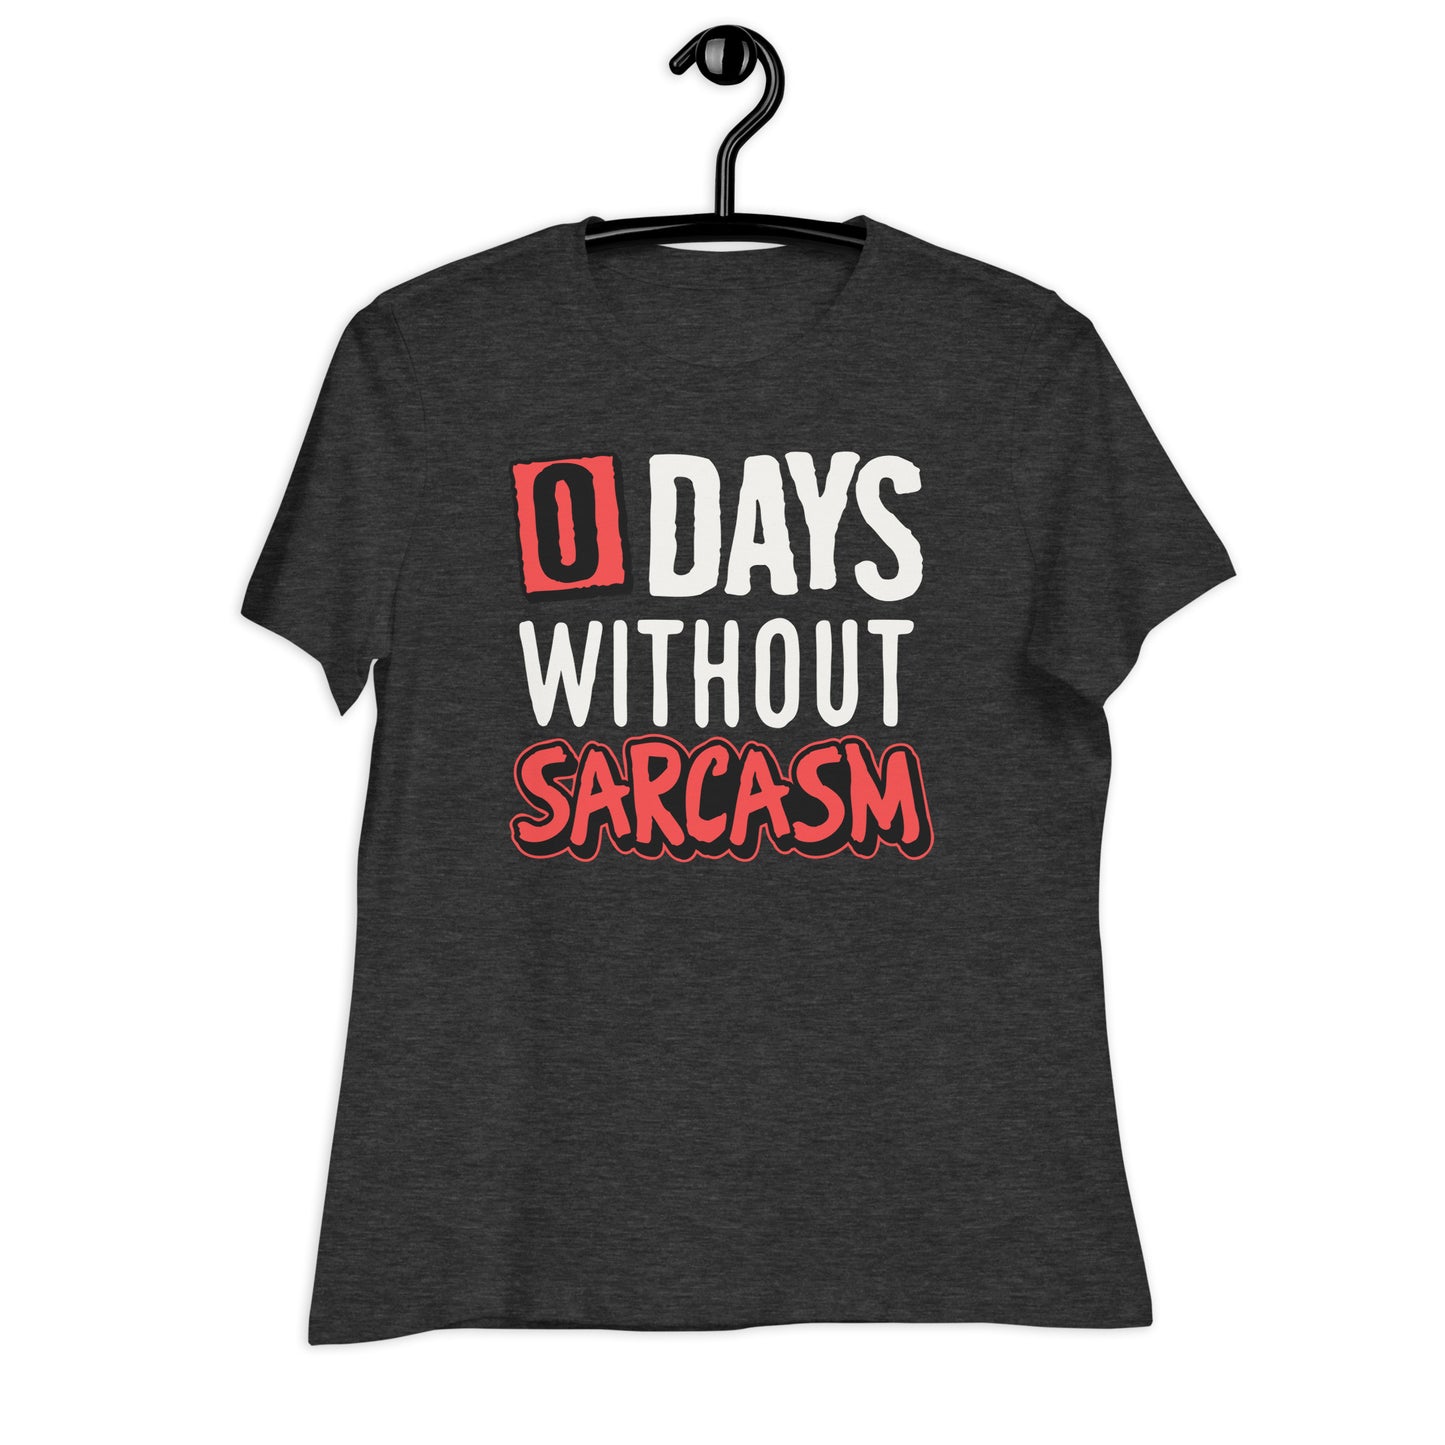 Zero Days without Sarcasm Funny Bella Canvas Relaxed Women's T-Shirt